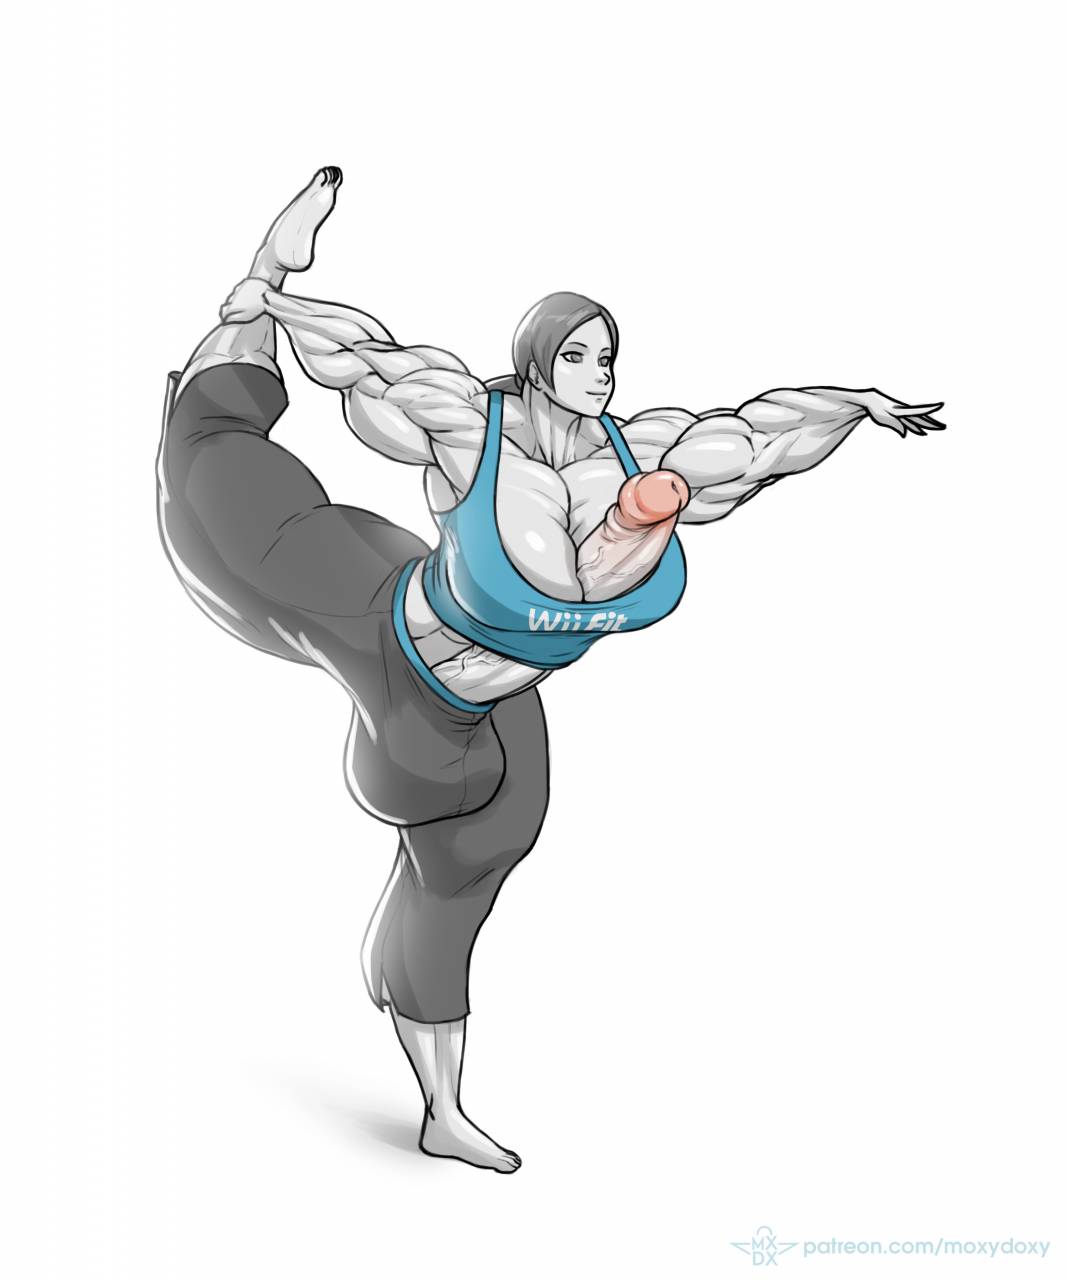 bassant hassan recommends wii fit trainer futa pic